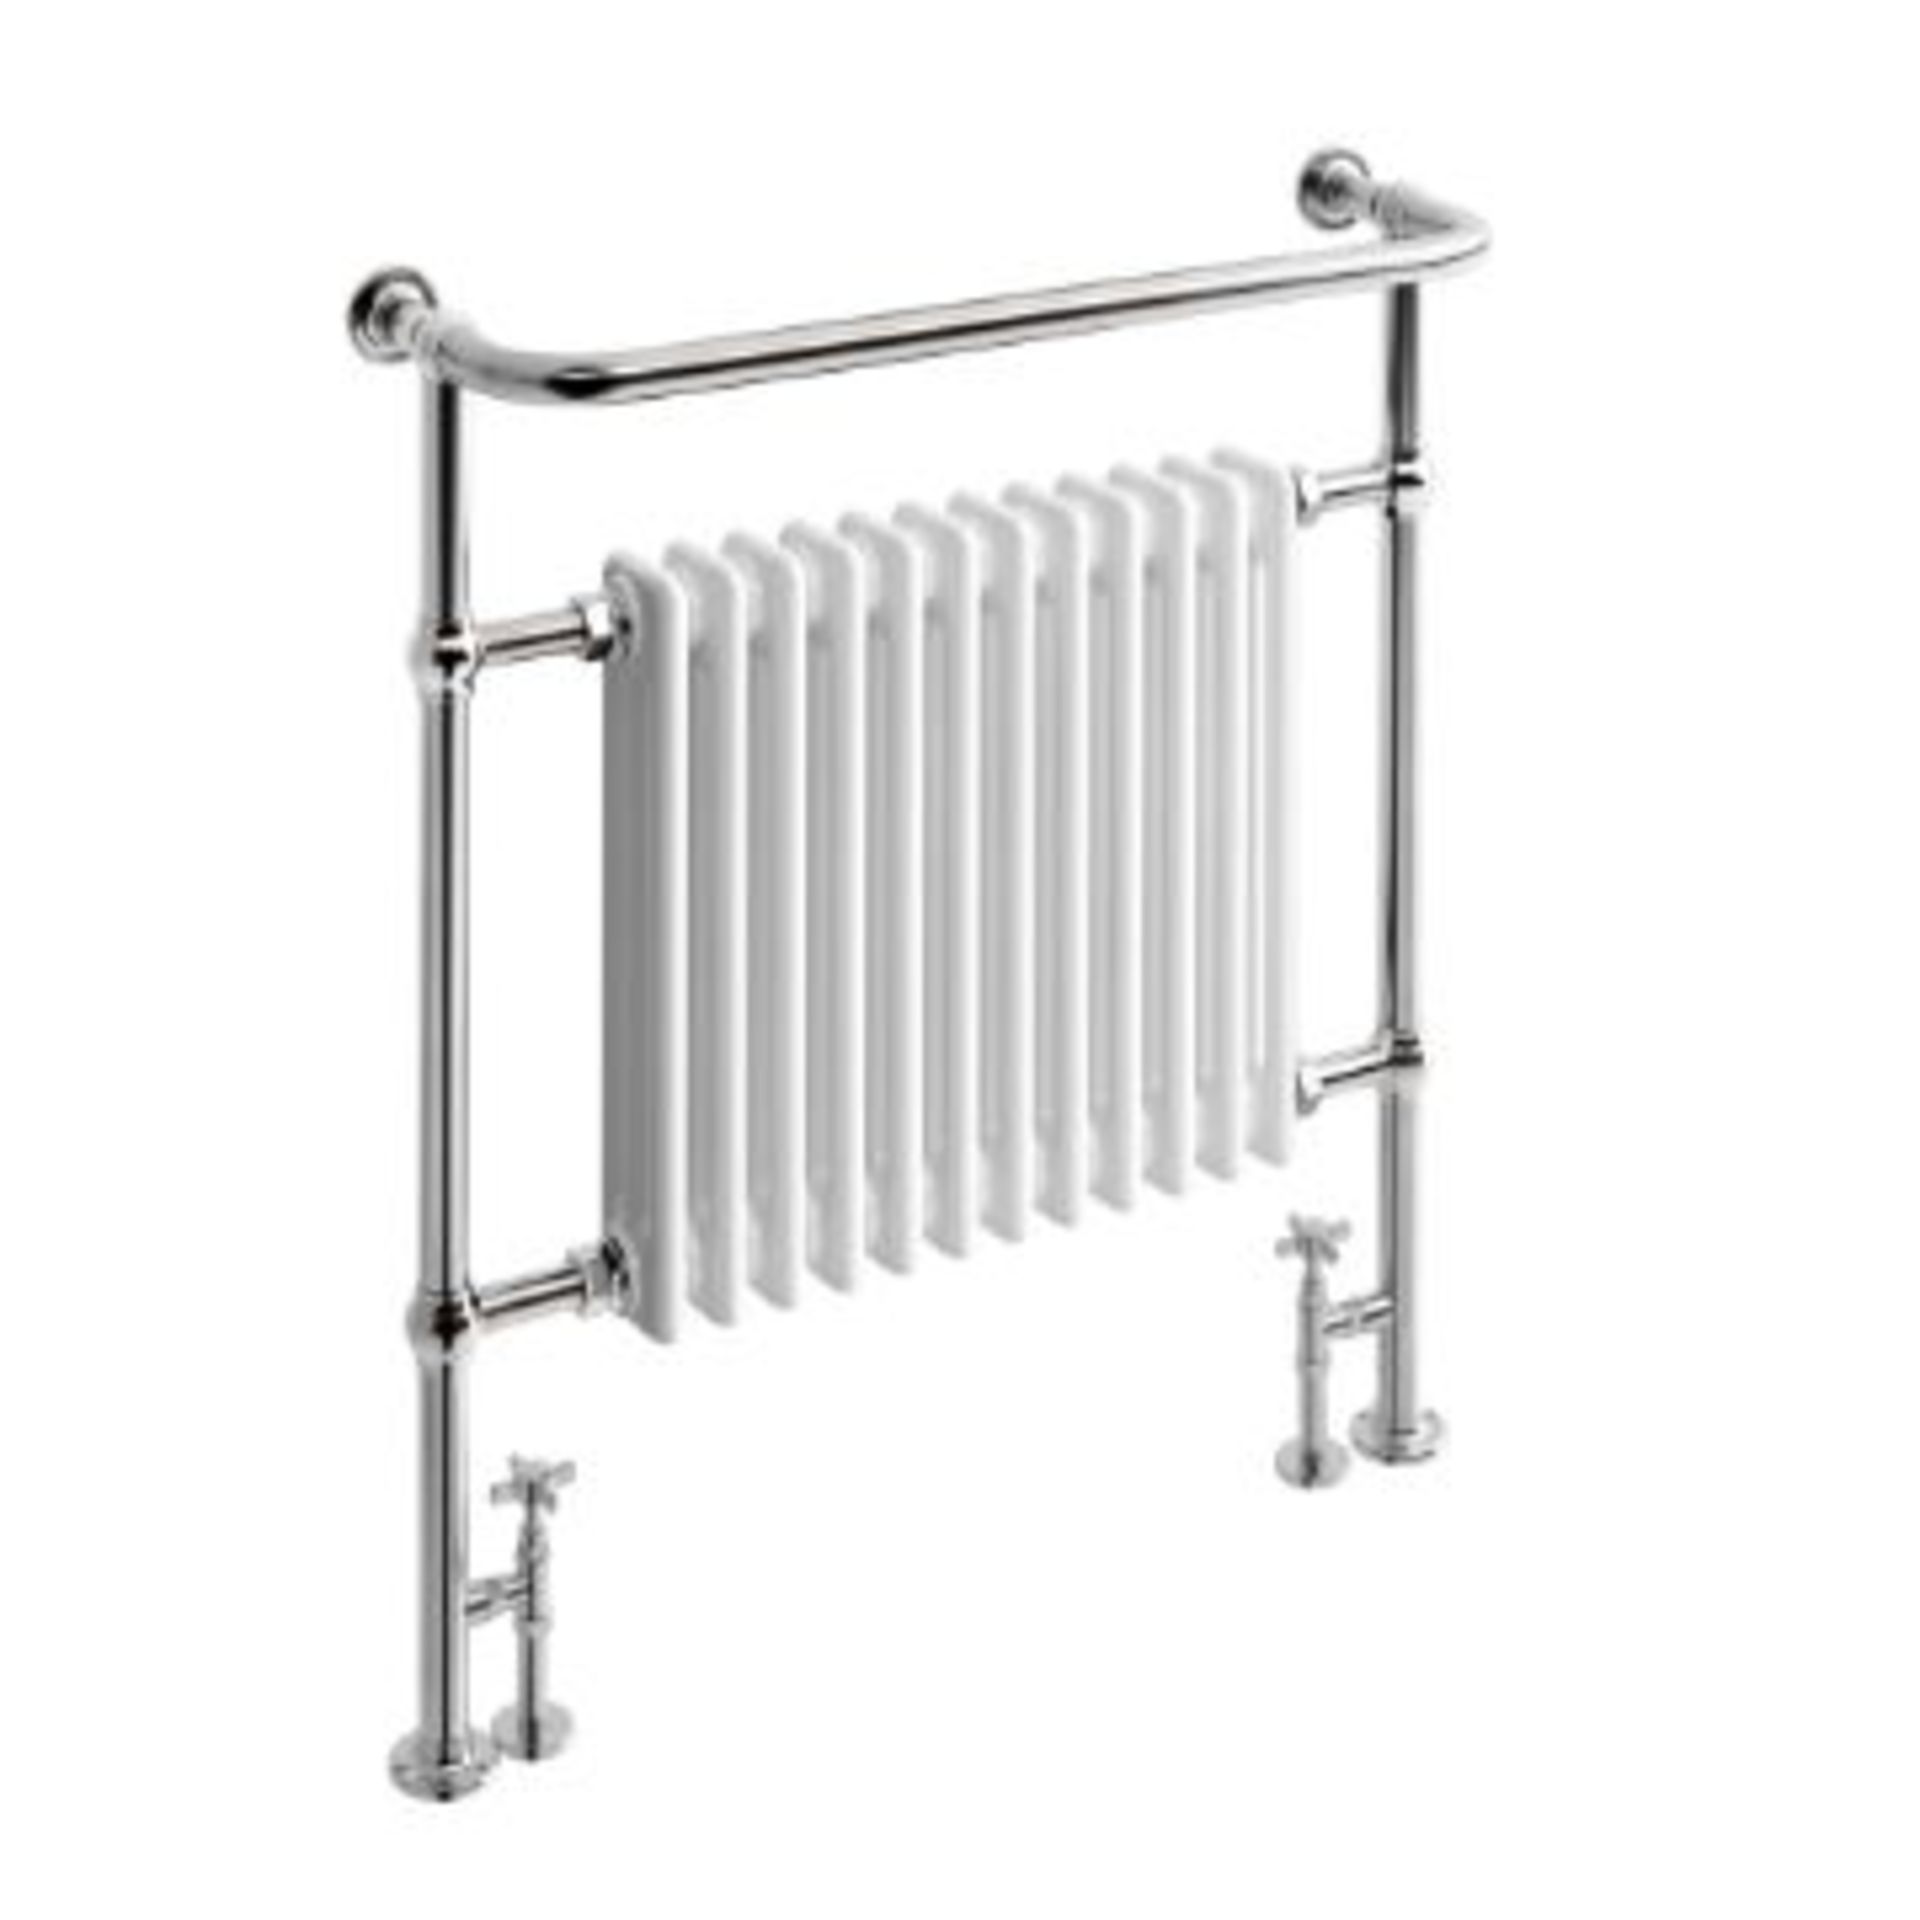 New & Boxed 952x839mm Large Traditional White Towel Rail Radiator - Victoria Premium. RRP £43... - Image 2 of 3